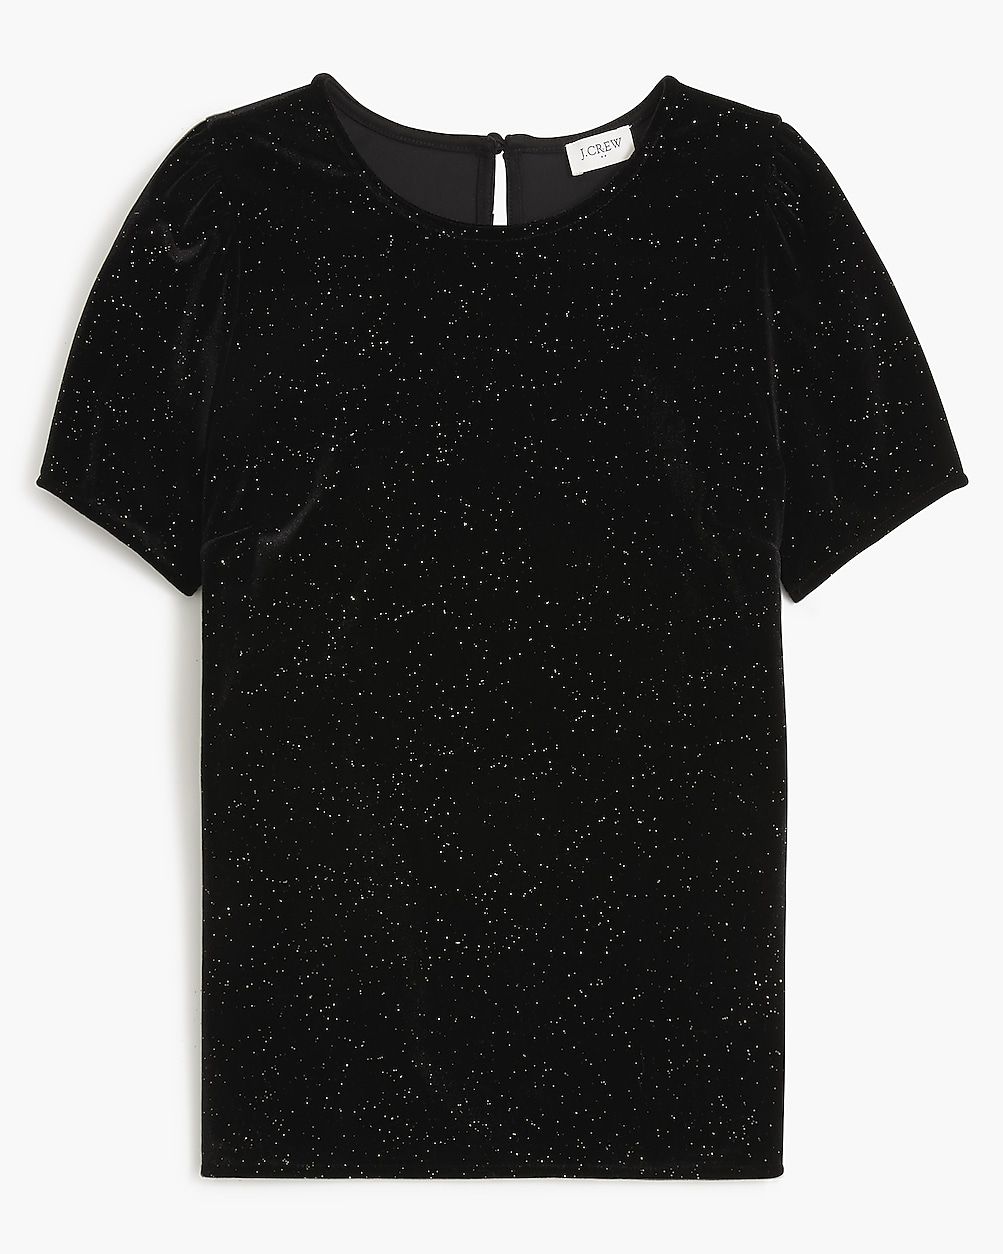 newShimmer velvet topComparable value:$79.50Your price:$29.50 (63% off)Free shipping! Plus, extra... | J.Crew Factory